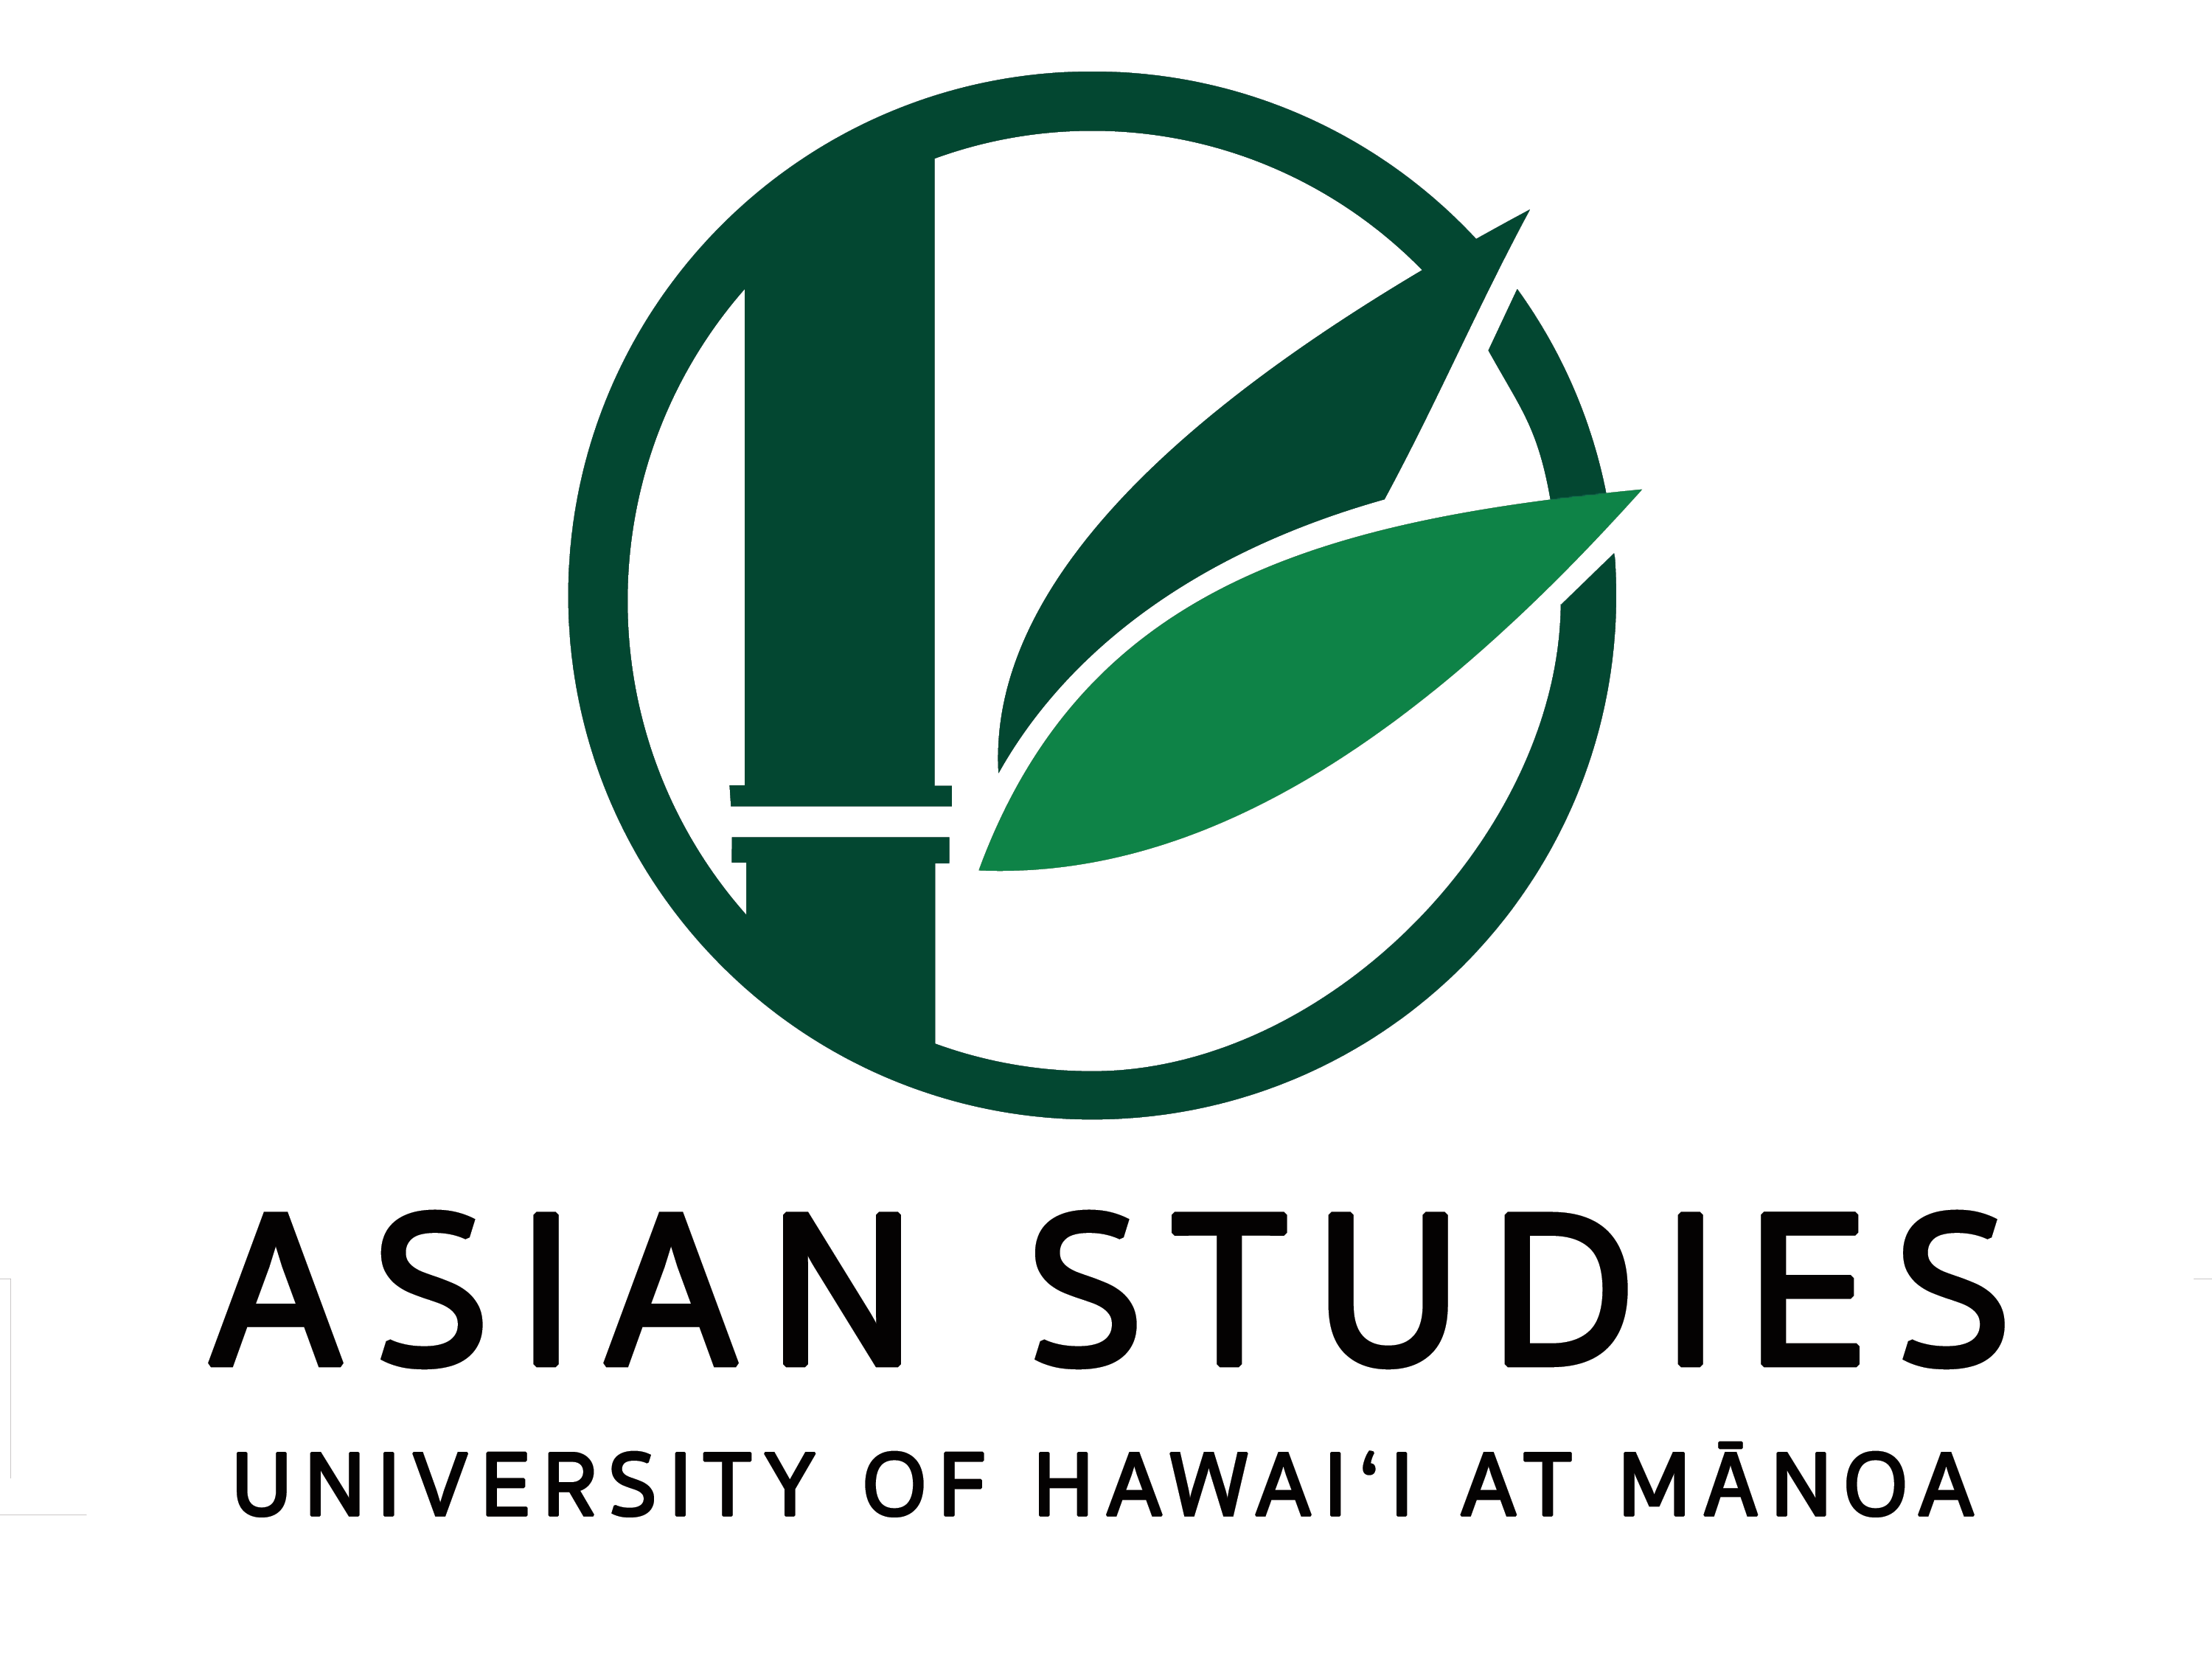 Asian studies logo. Green bamboo illustration enclosed in green circle with white background. Black text underneath logo "Asian Studies University of Hawaii at Manoa" in all capital letters.